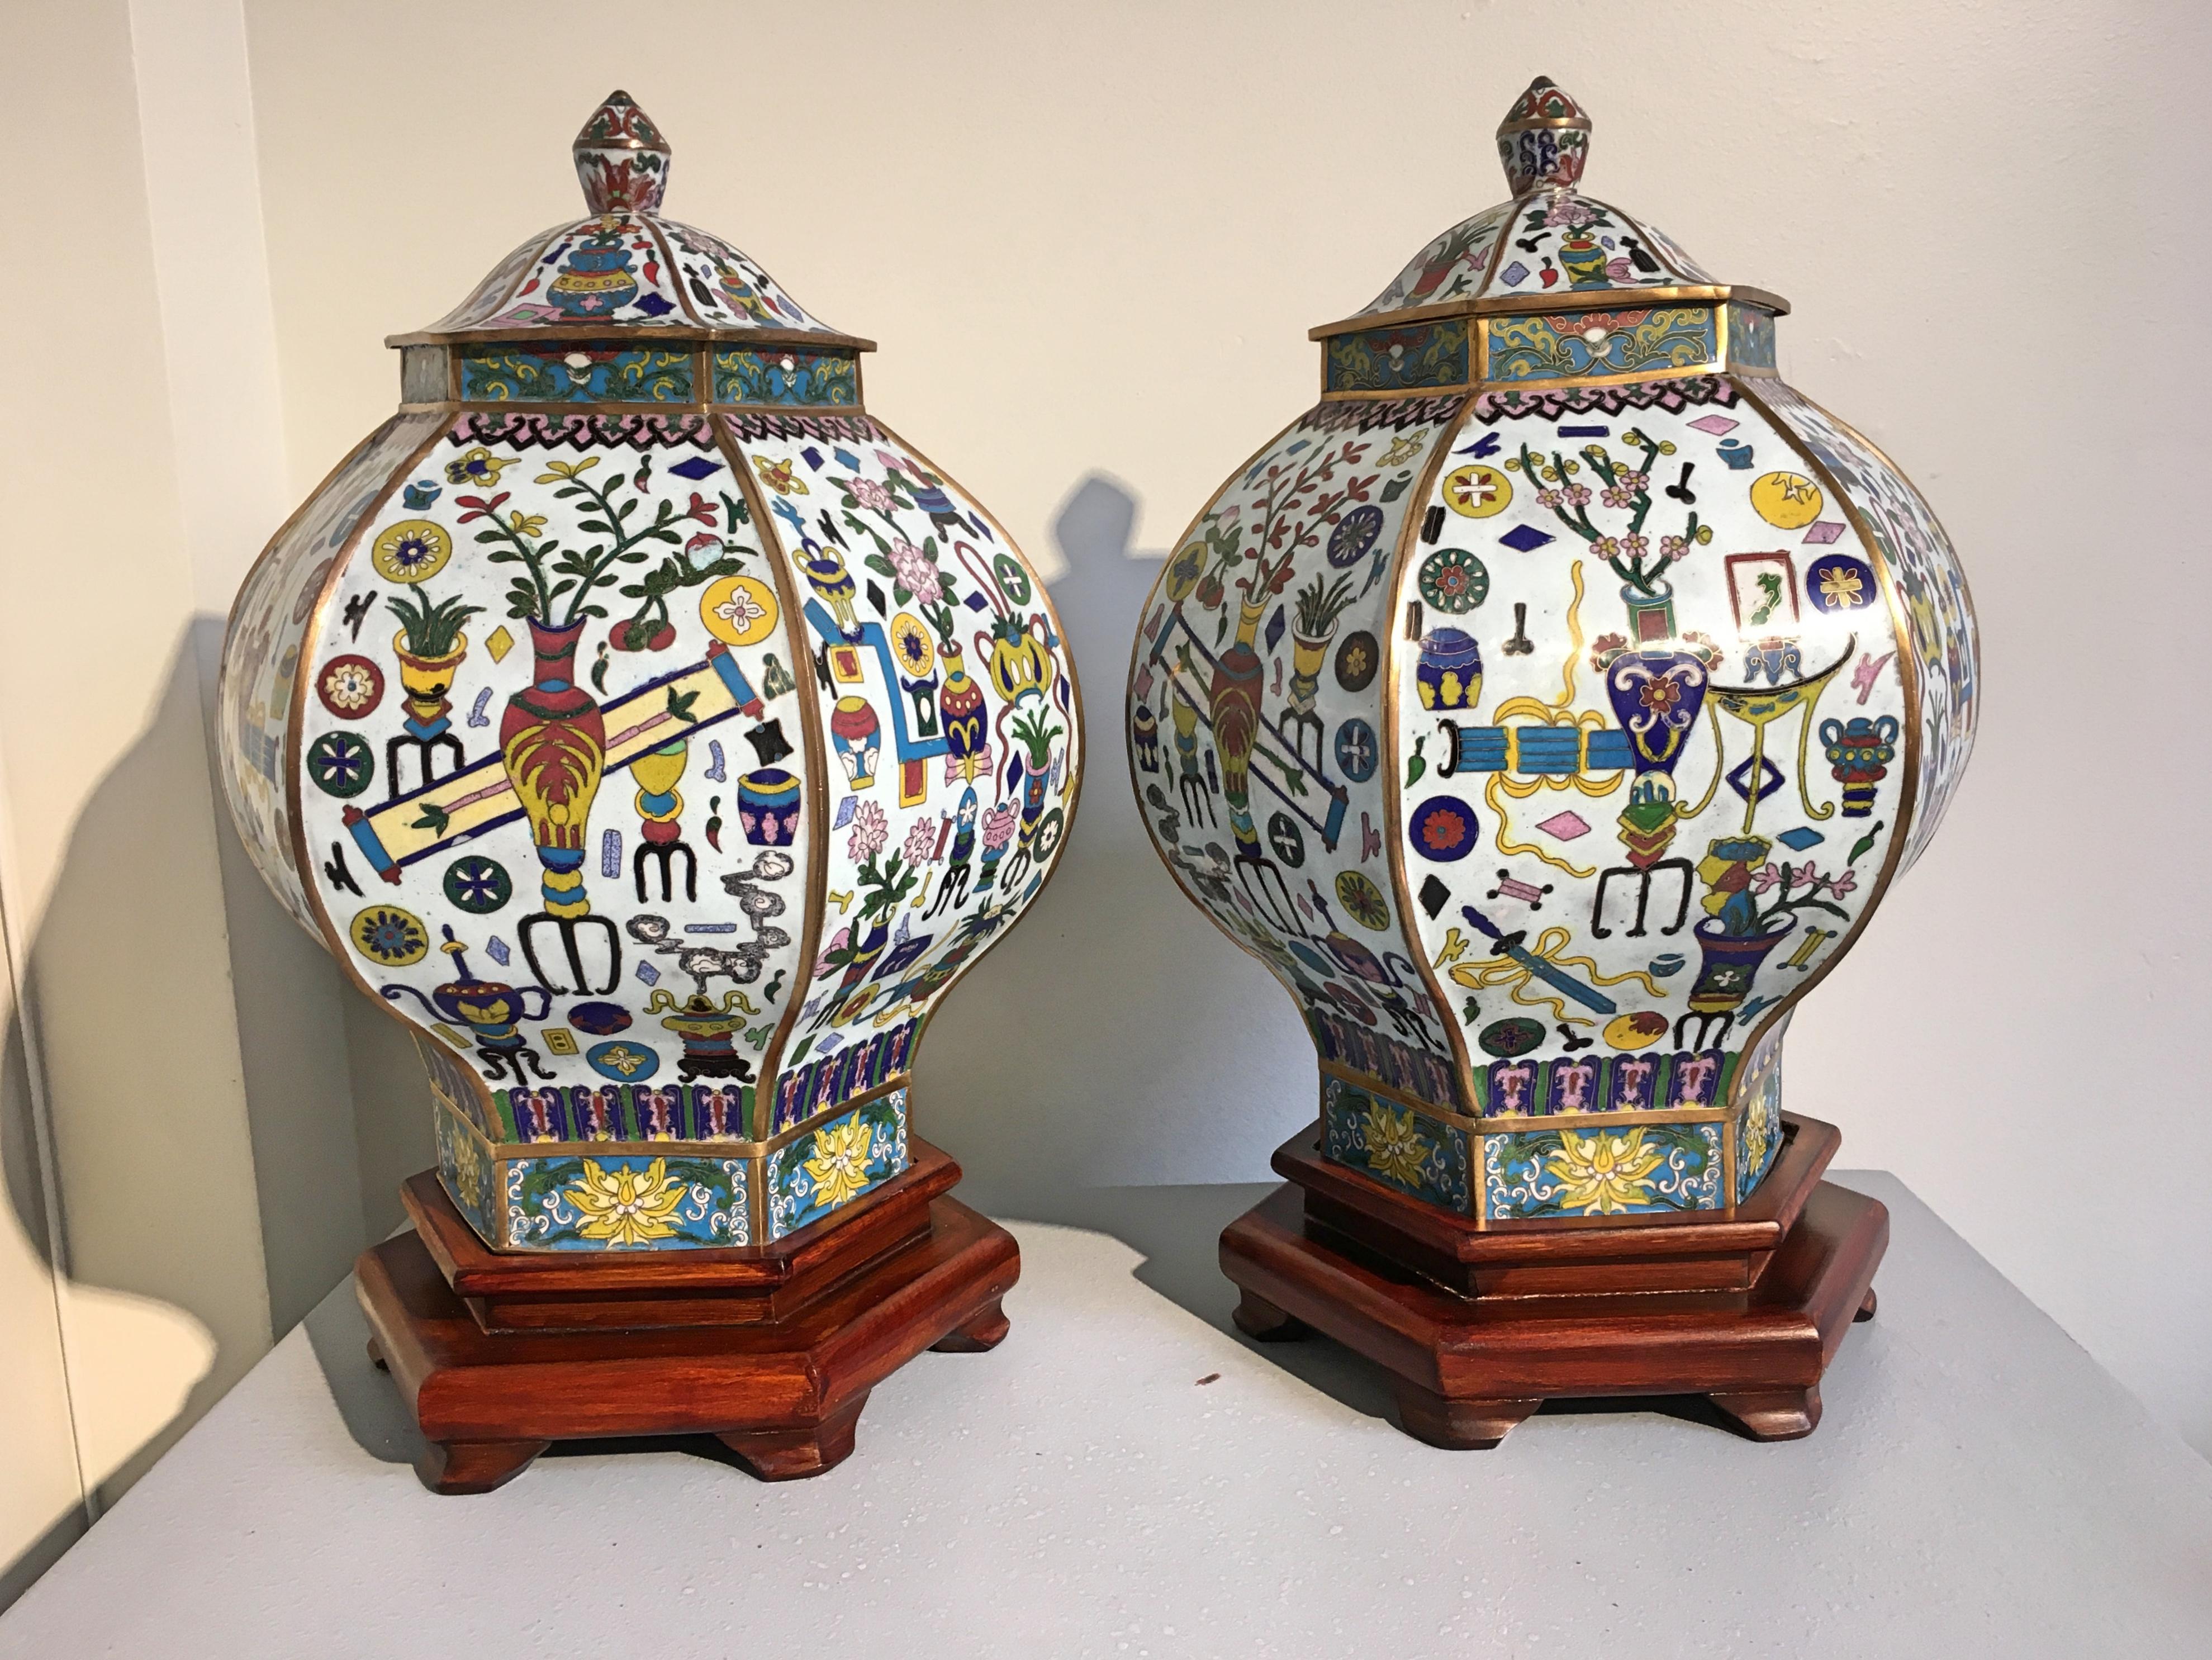 An impressive pair of vintage Chinese hexagonal covered cloisonné vases or jars featuring the 